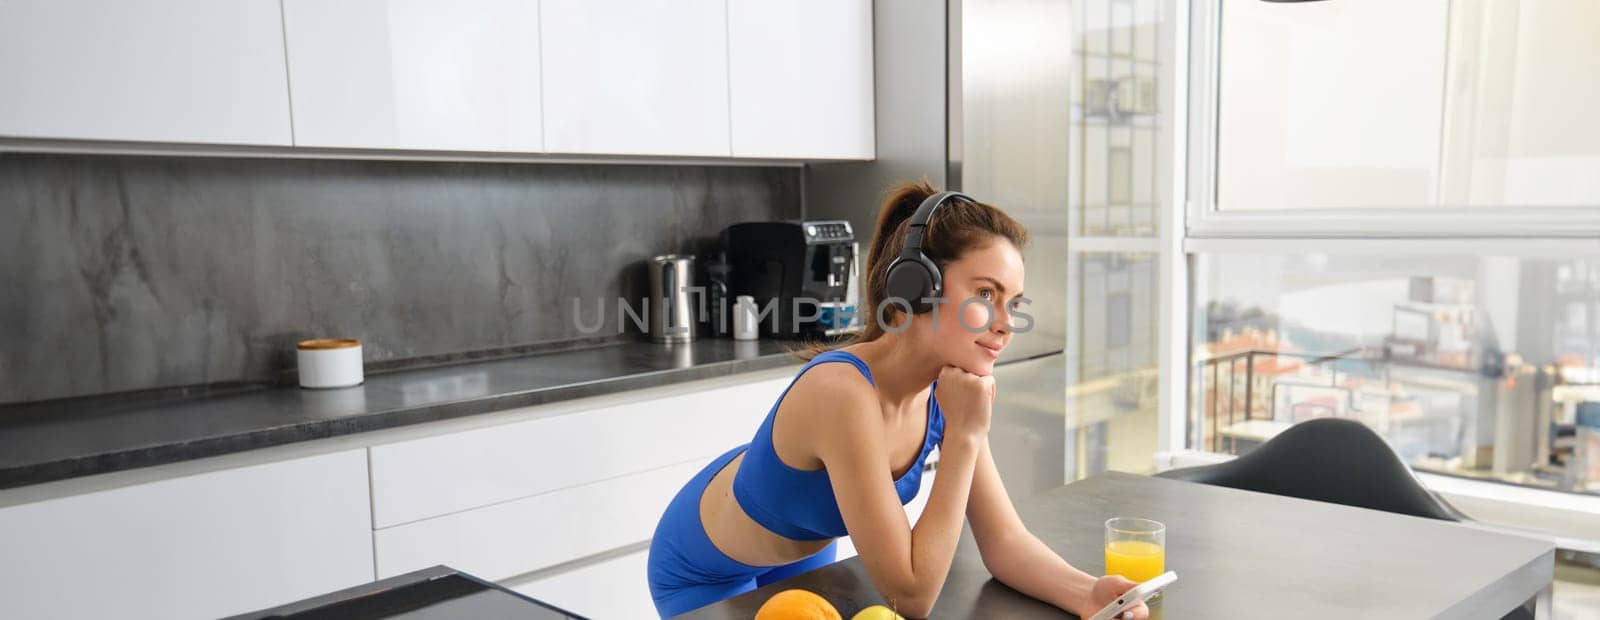 Portrait of stylish sportswoman, listening music in headphones, looking at smartphone, watching video on mobile phone, standing in kitchen, wearing activewear.